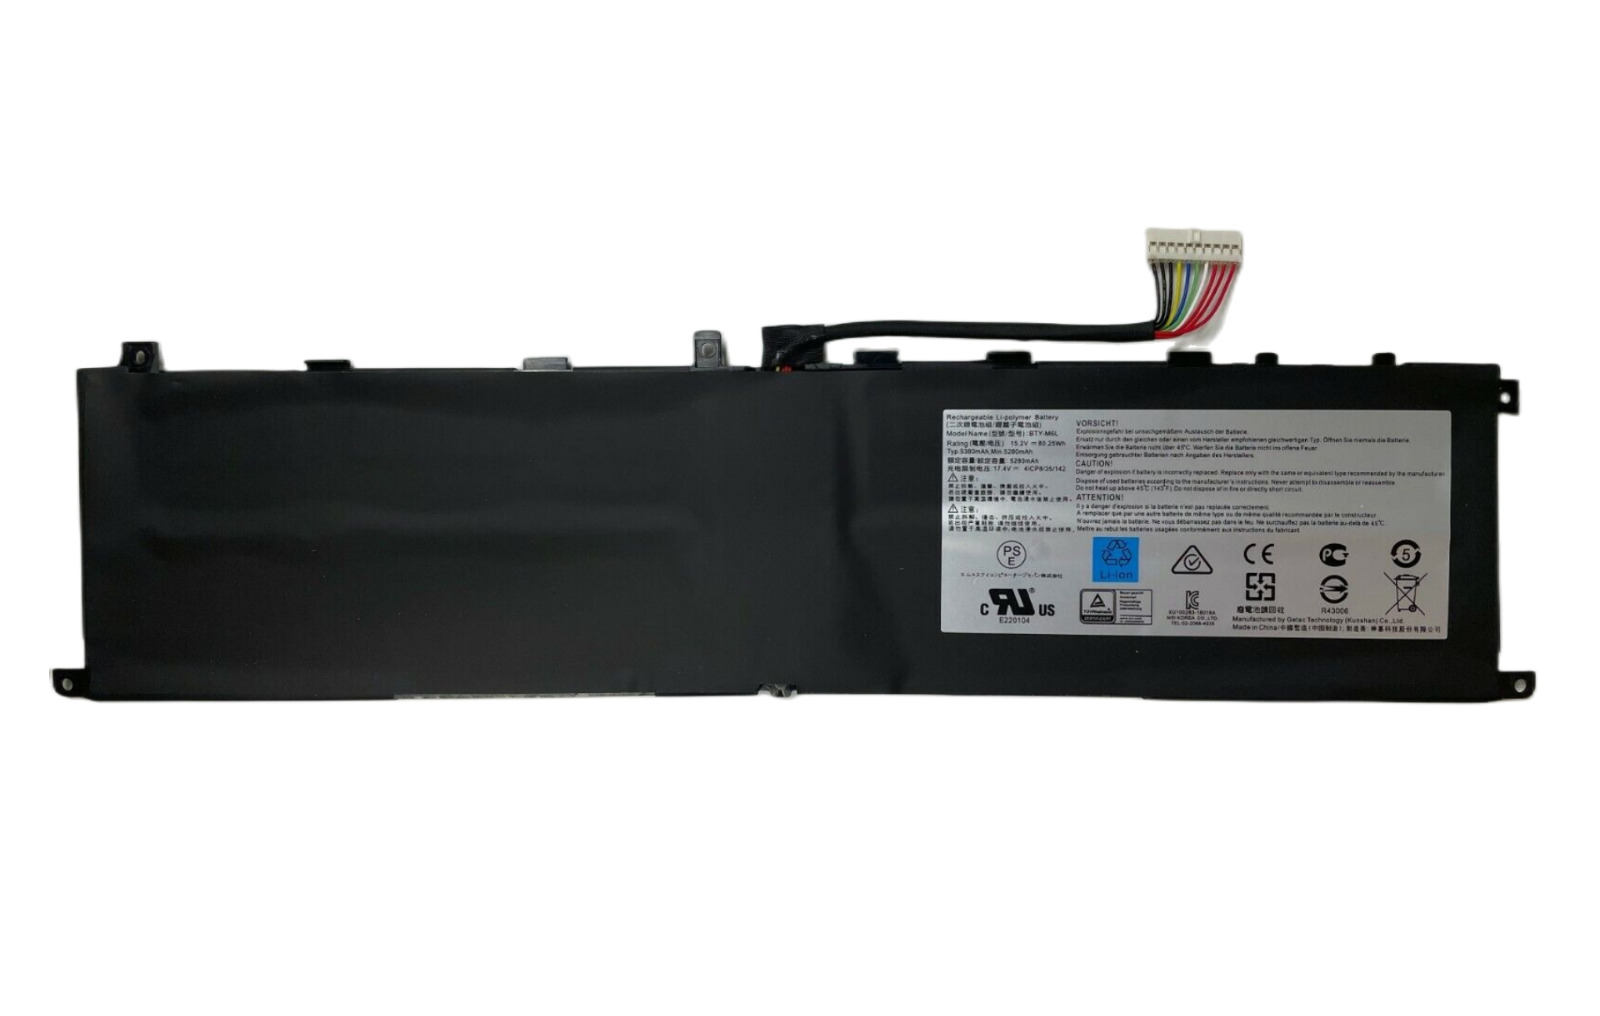 Genuine OEM BTY-M6L Battery for MSI GS65 GS75 Stealth Thin 8SE 8SF 8SG Series